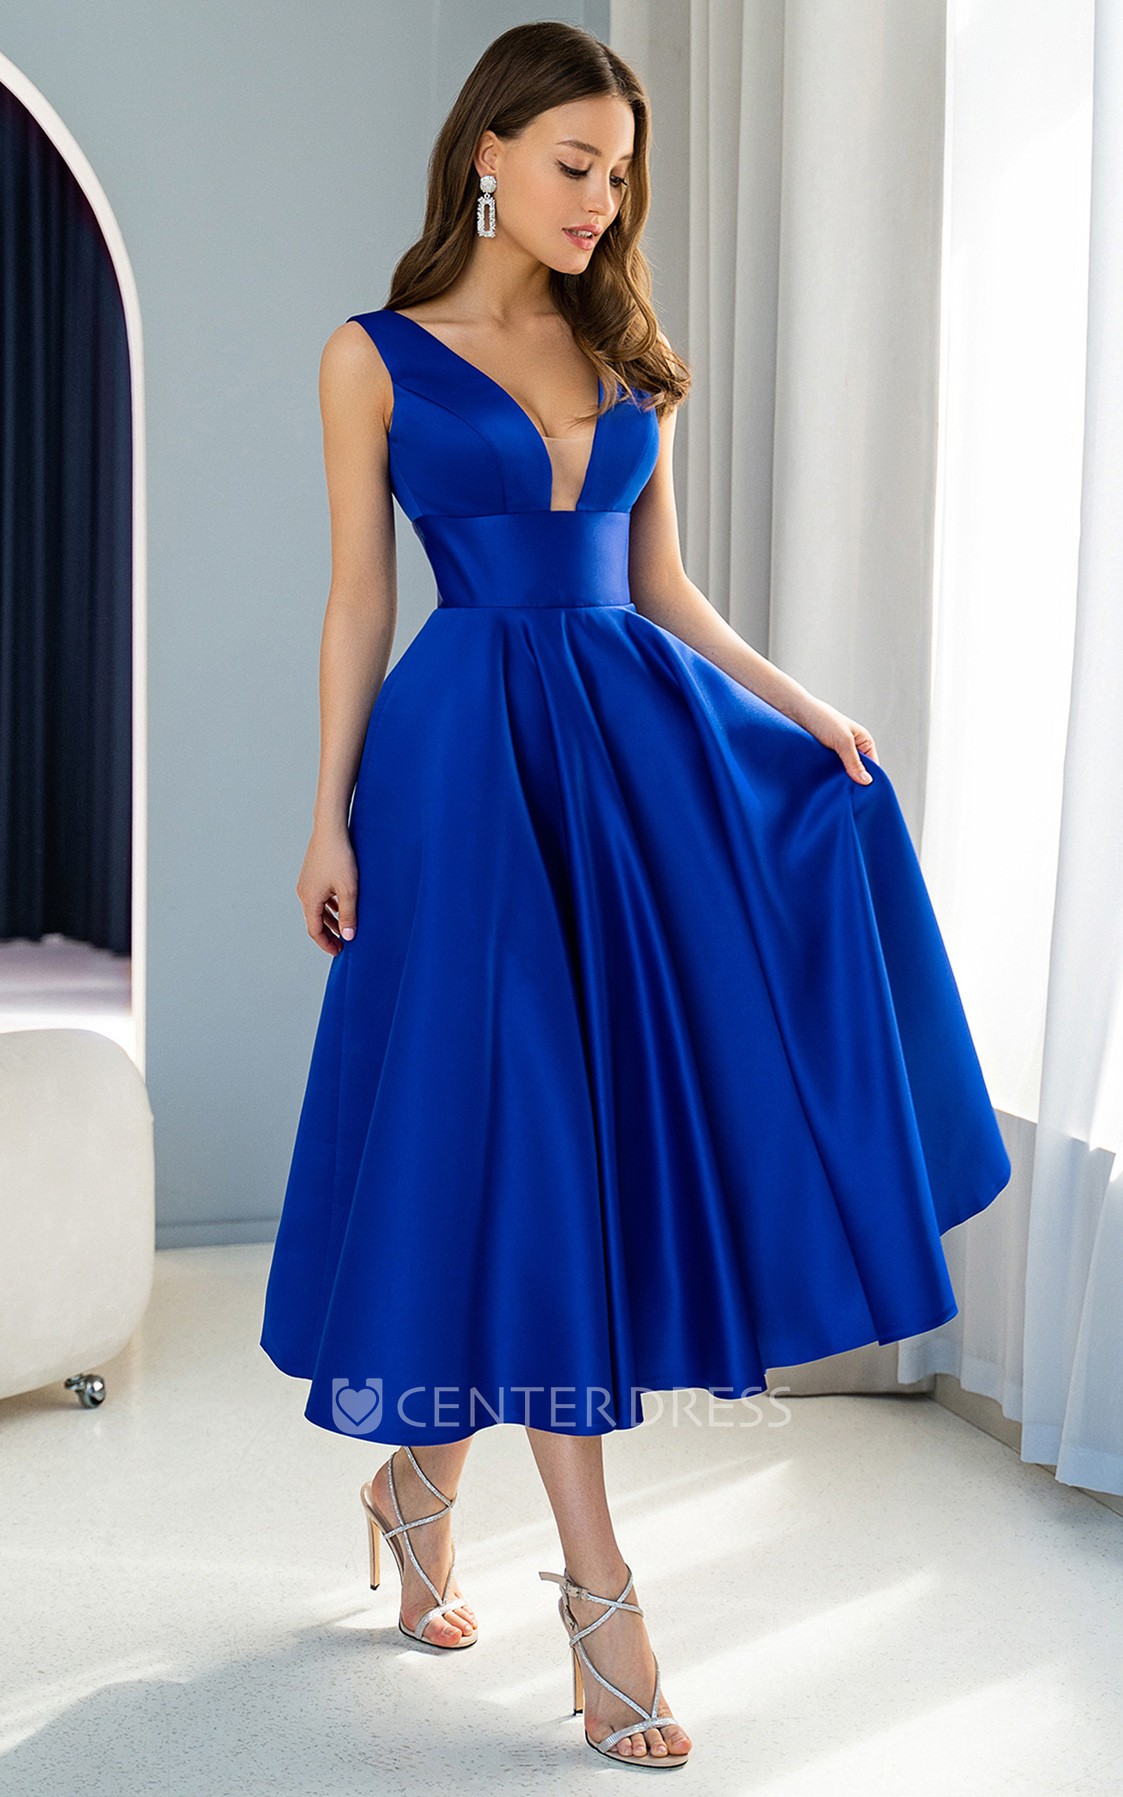 Elegant Party Wear Cocktail Party Birthday Dress With Pockets A-Line  Strapless Sleeveless Knee Length Evening Dresses